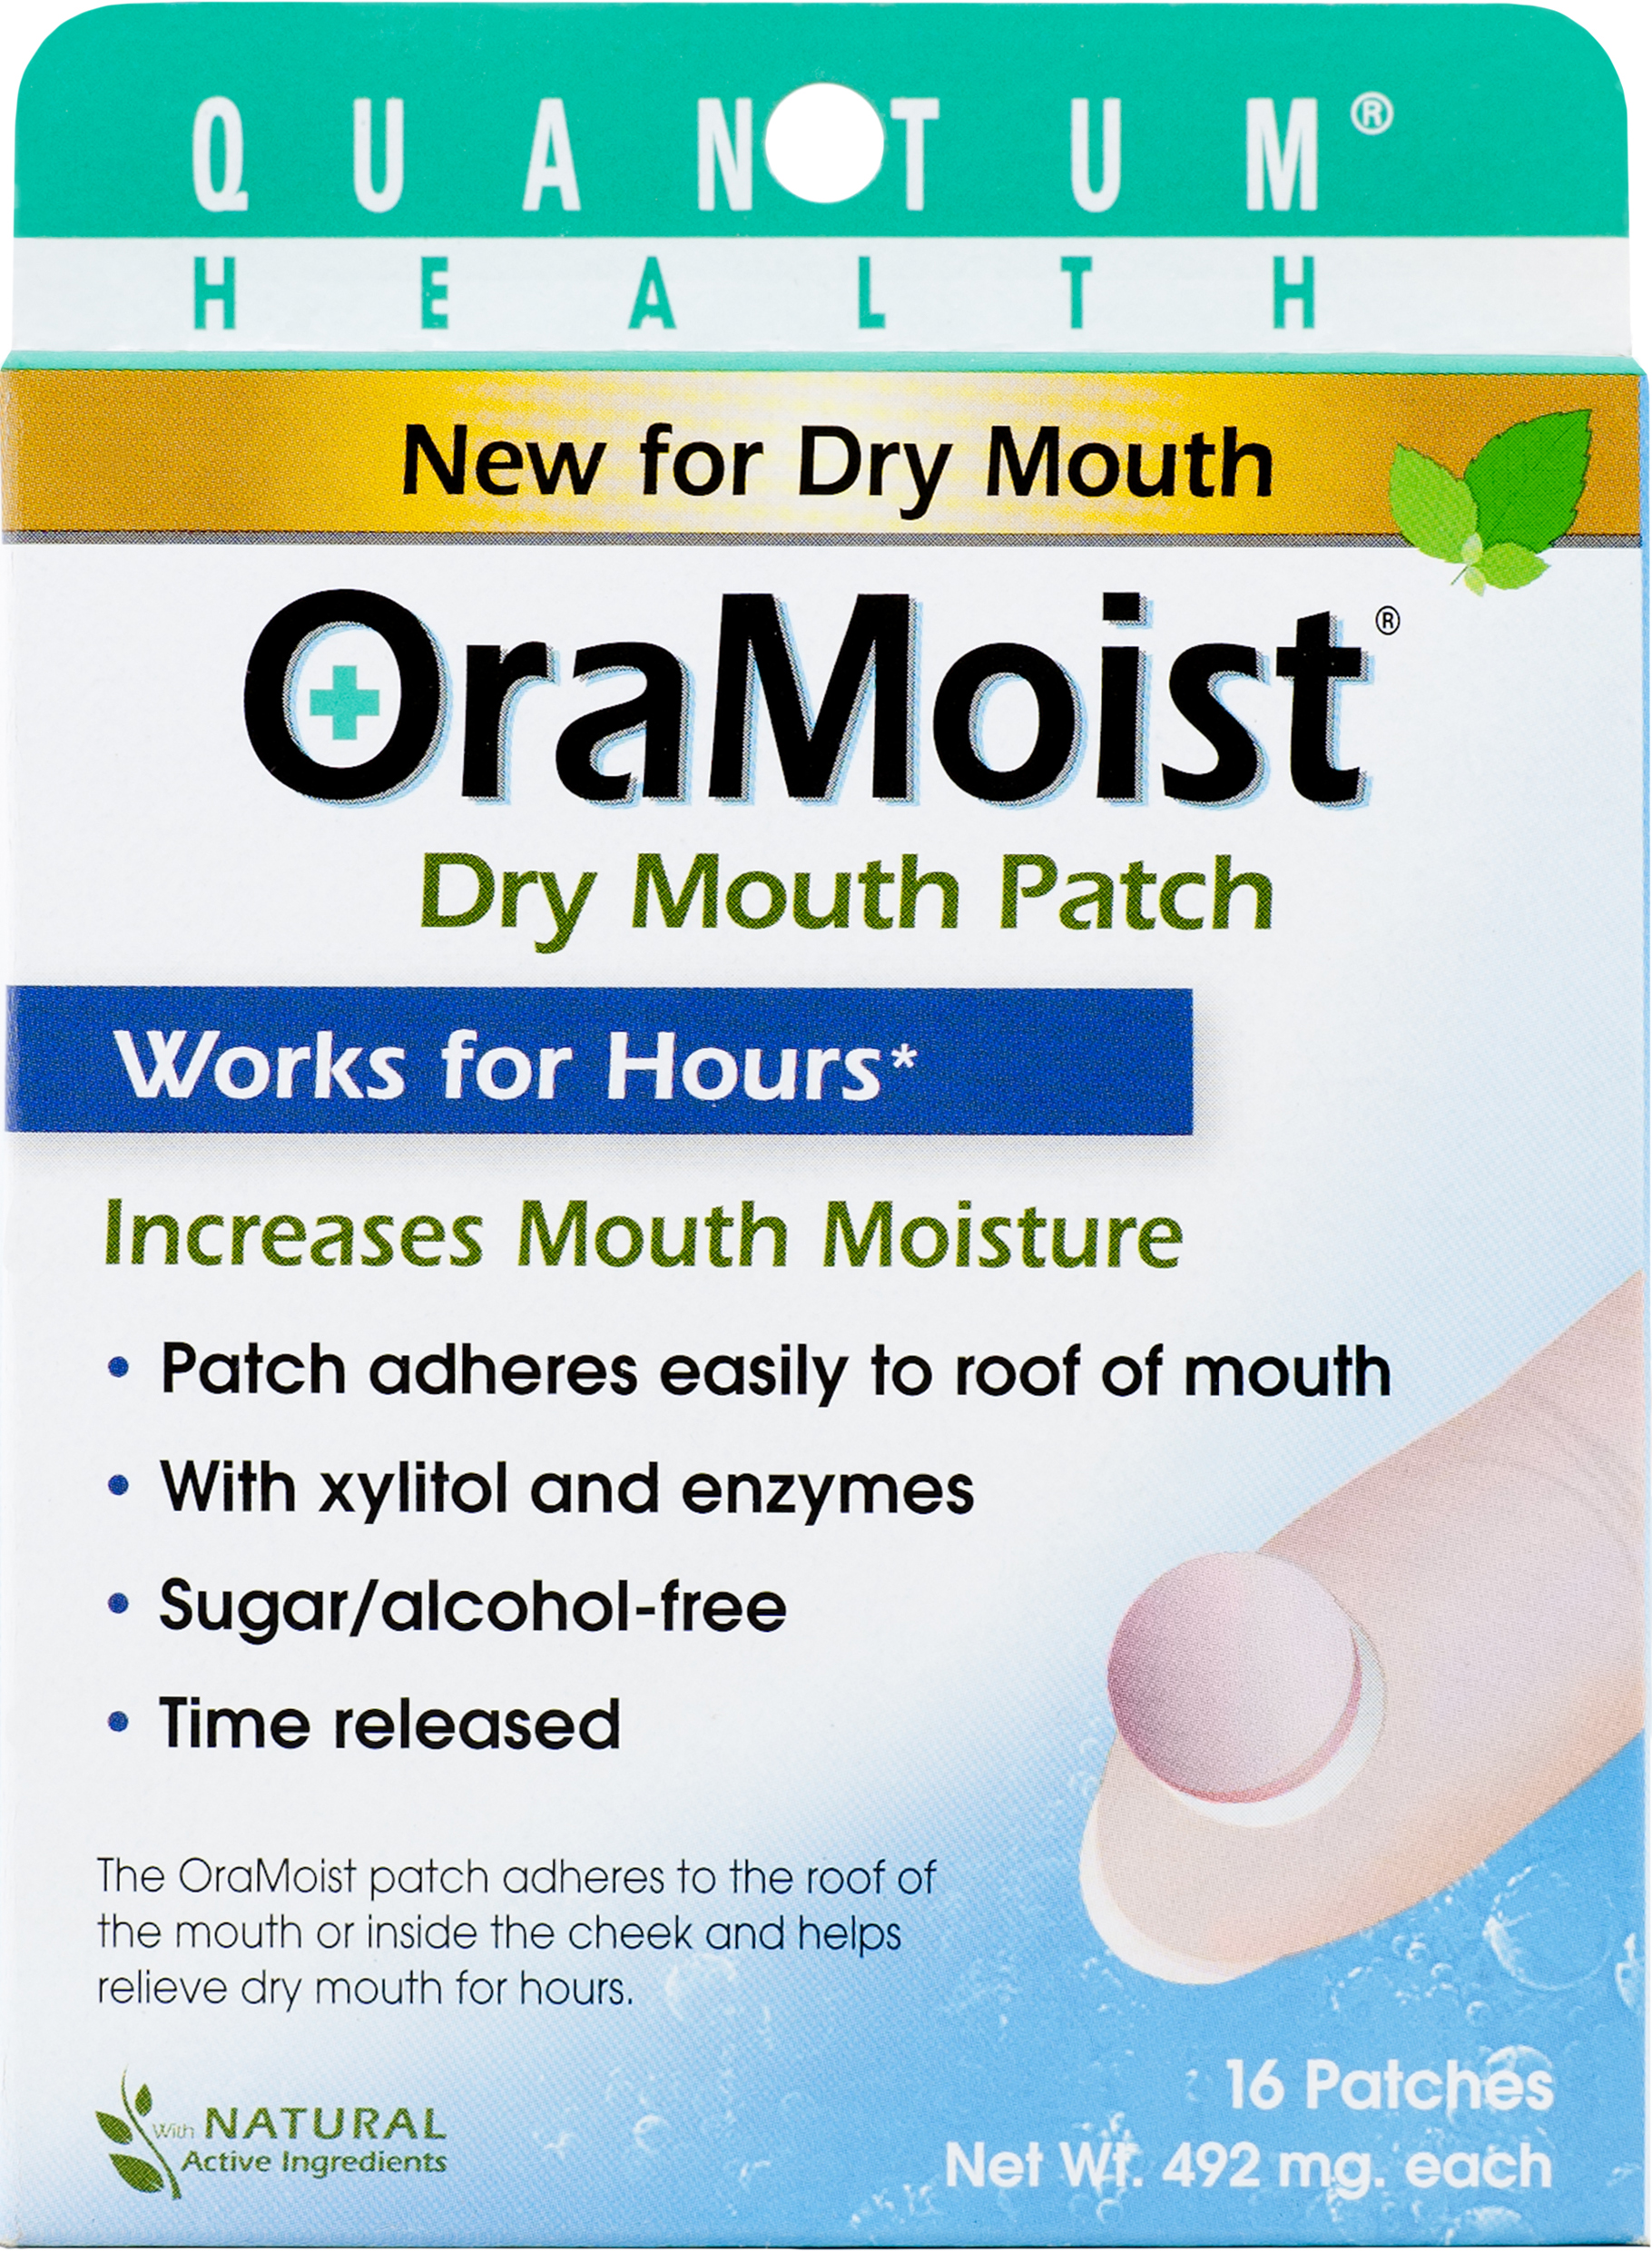 OraMoist Dry Mouth Patch increases mouth mositure for hours